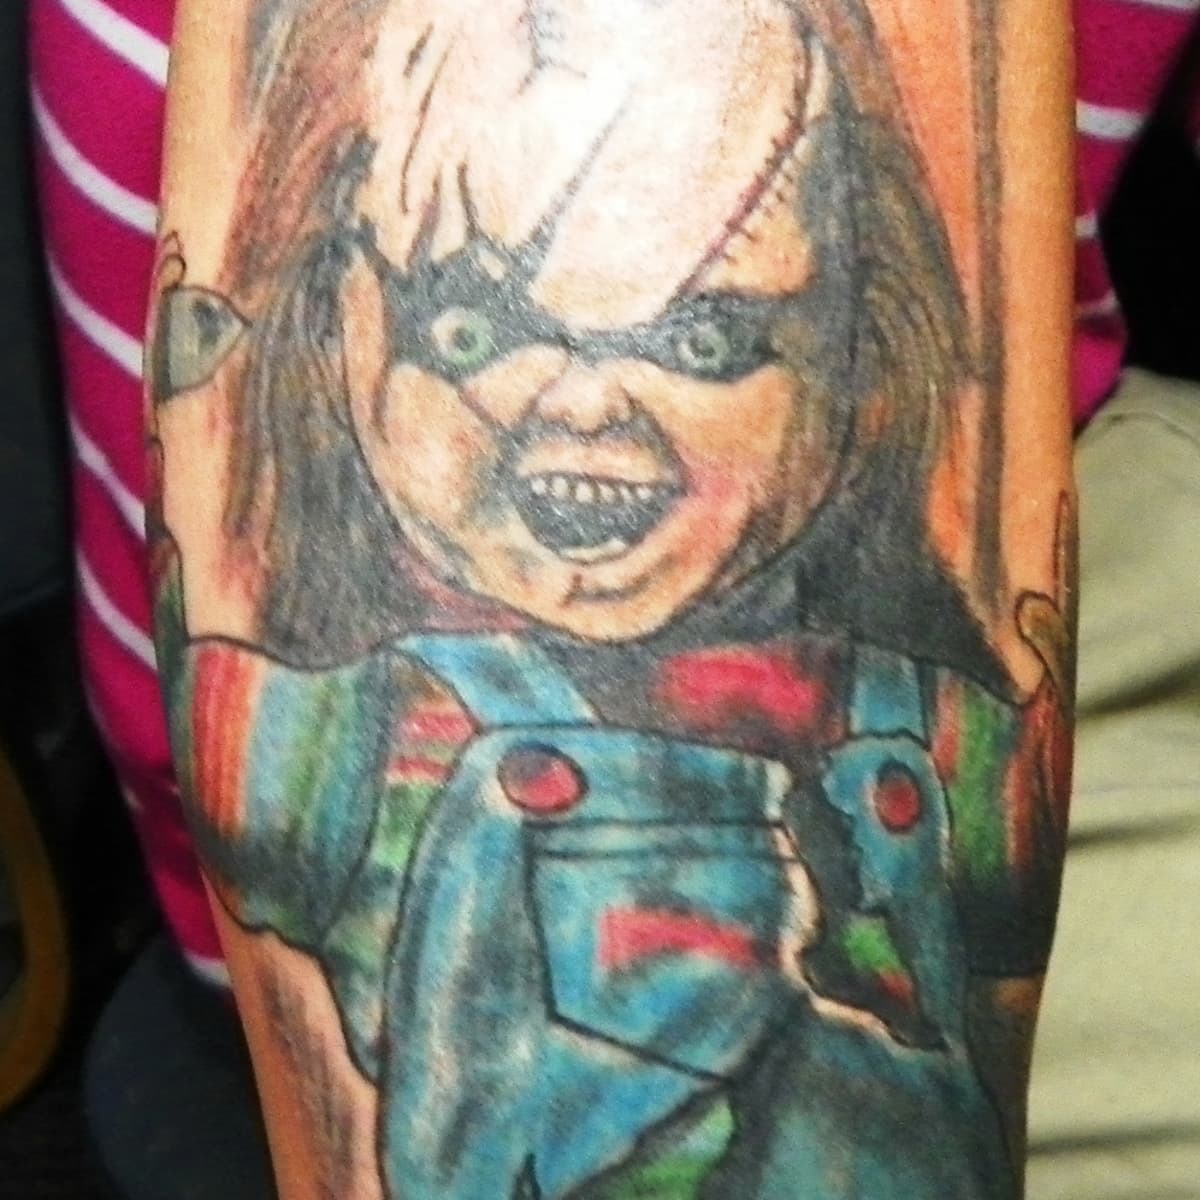 Childs Play Man with Chucky tattoo arrested in car theft cops say